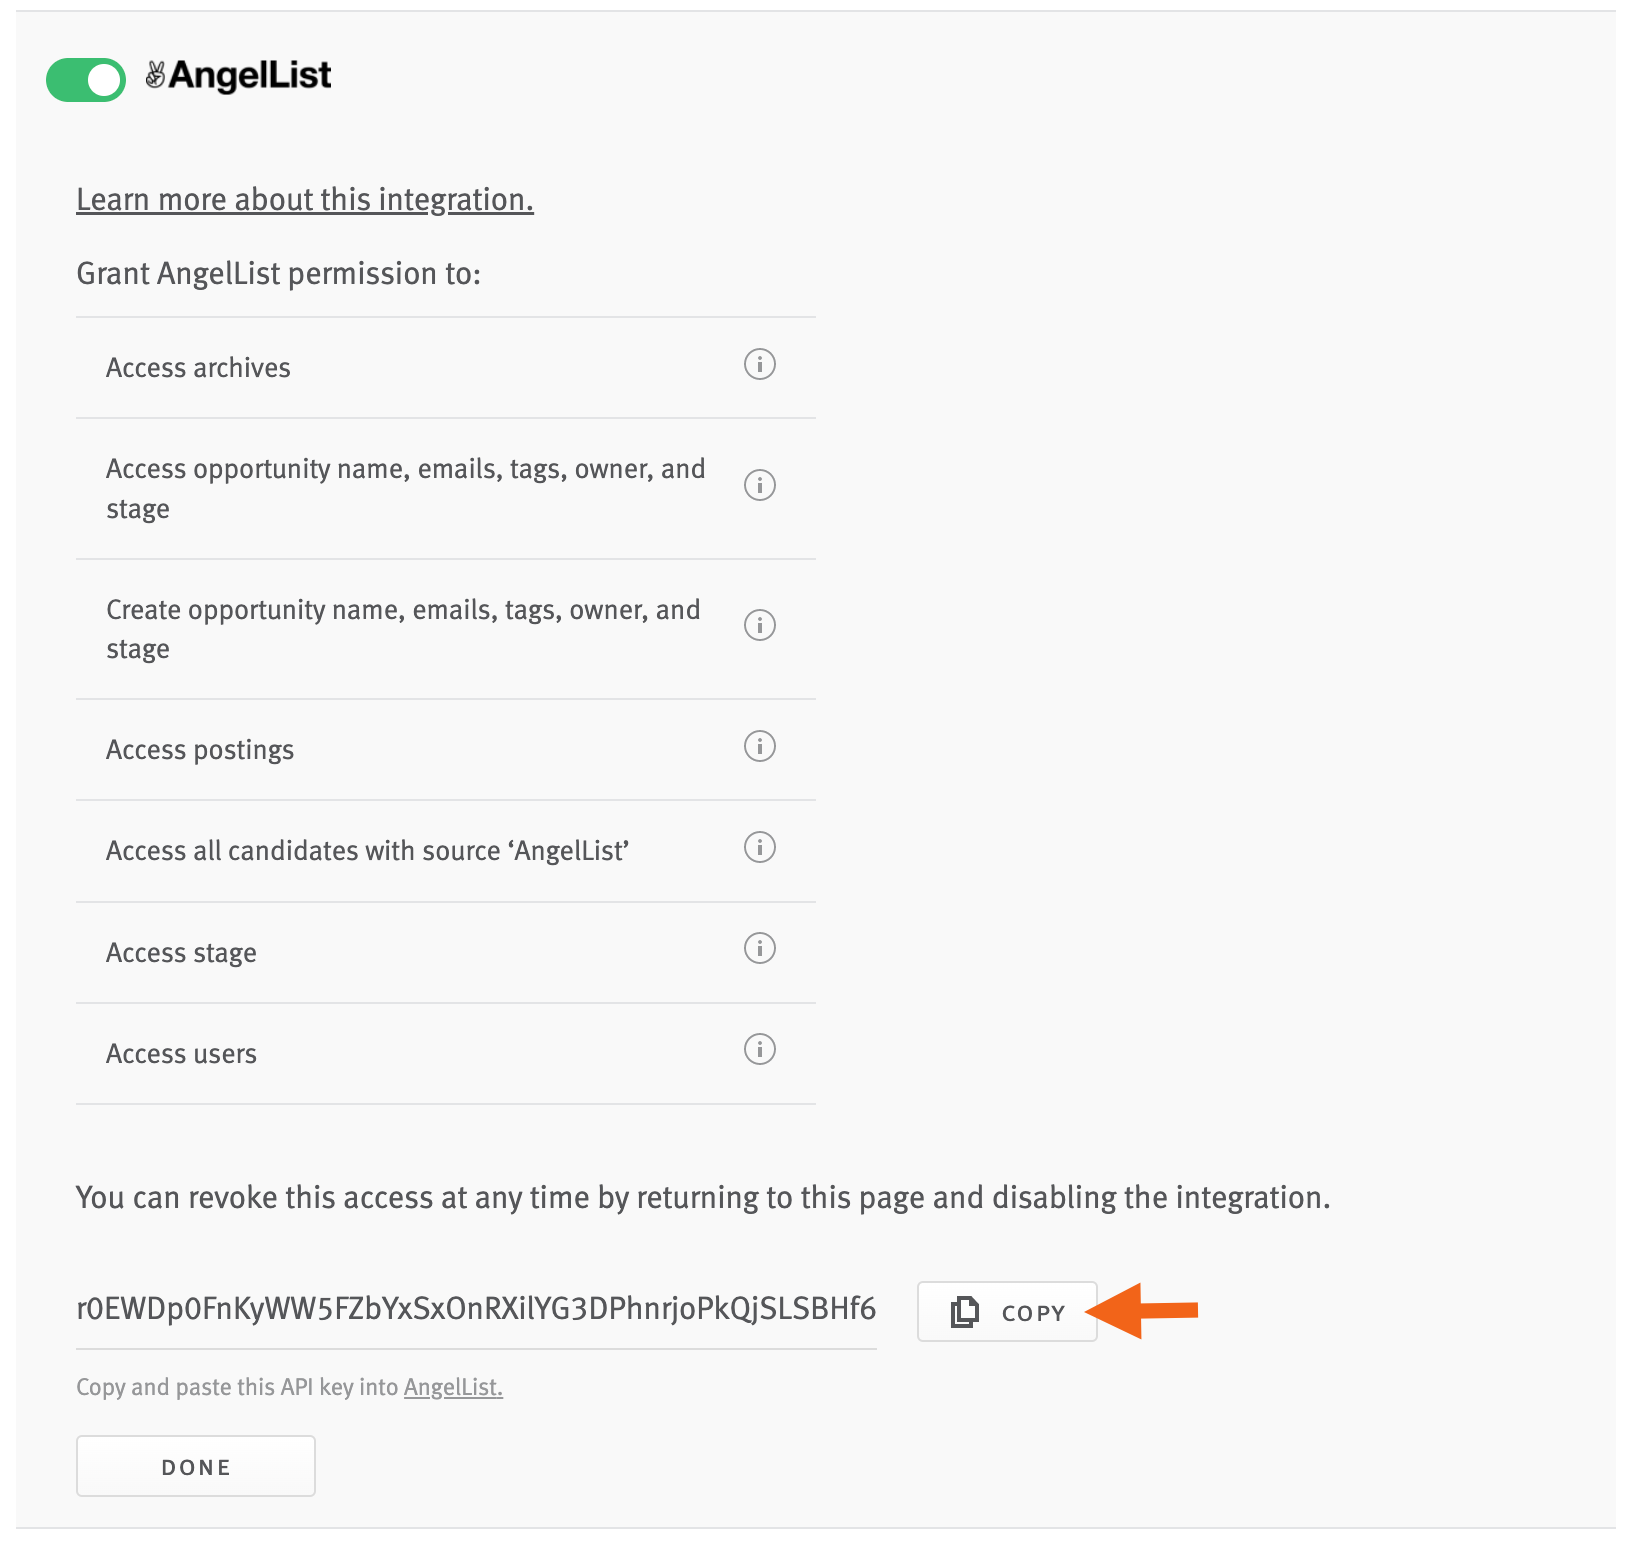 Expanded AngelList integration tile with arrow pointing to Copy button next to API key field.